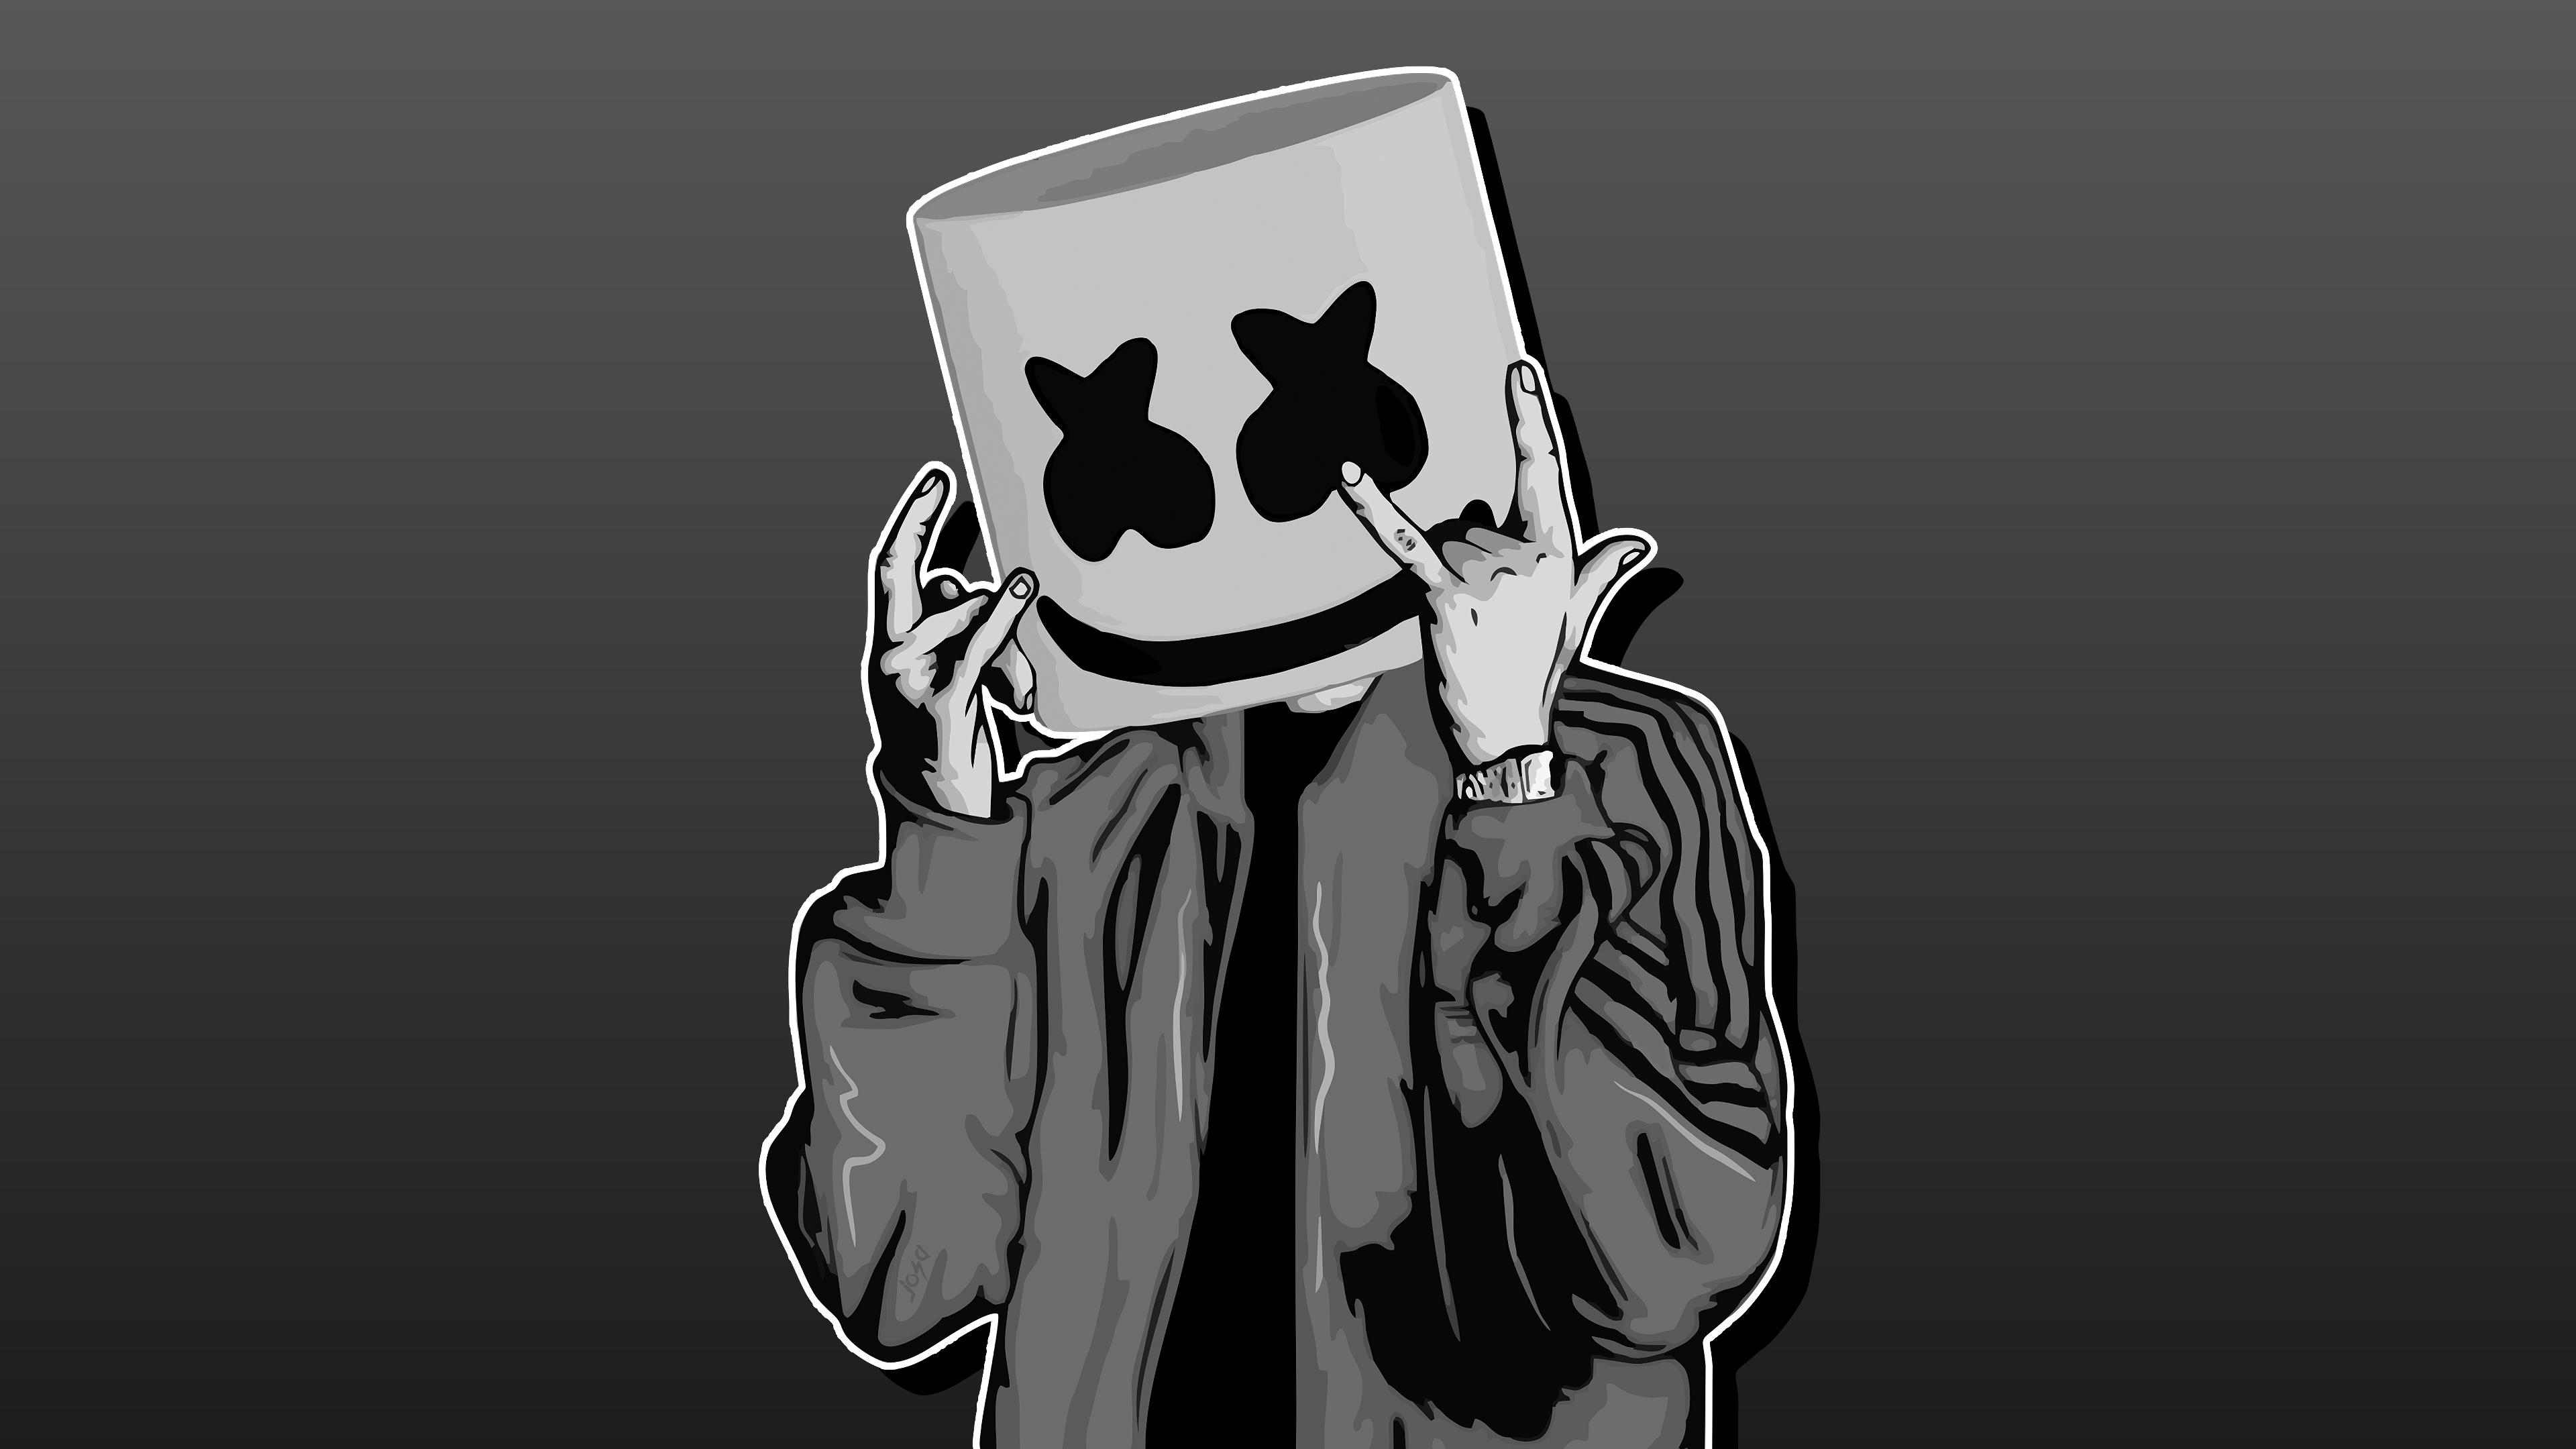 Marshmello Amoled  IPhone Wallpapers  iPhone Wallpapers